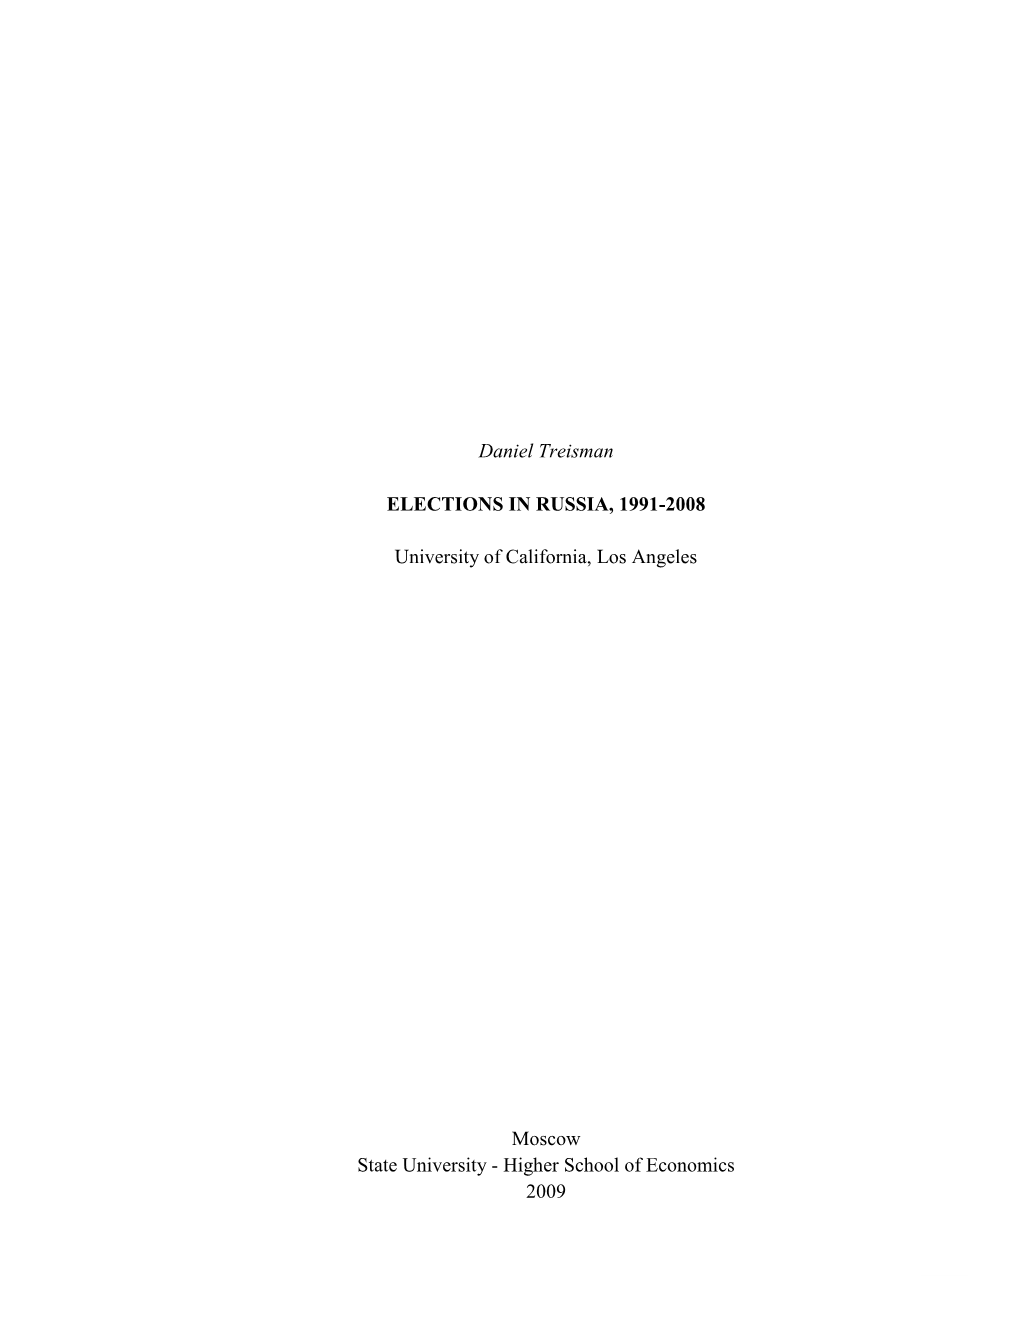 Treisman D. Elections in Russia, 1991 - 2008: Working Paper WP7/2009/06